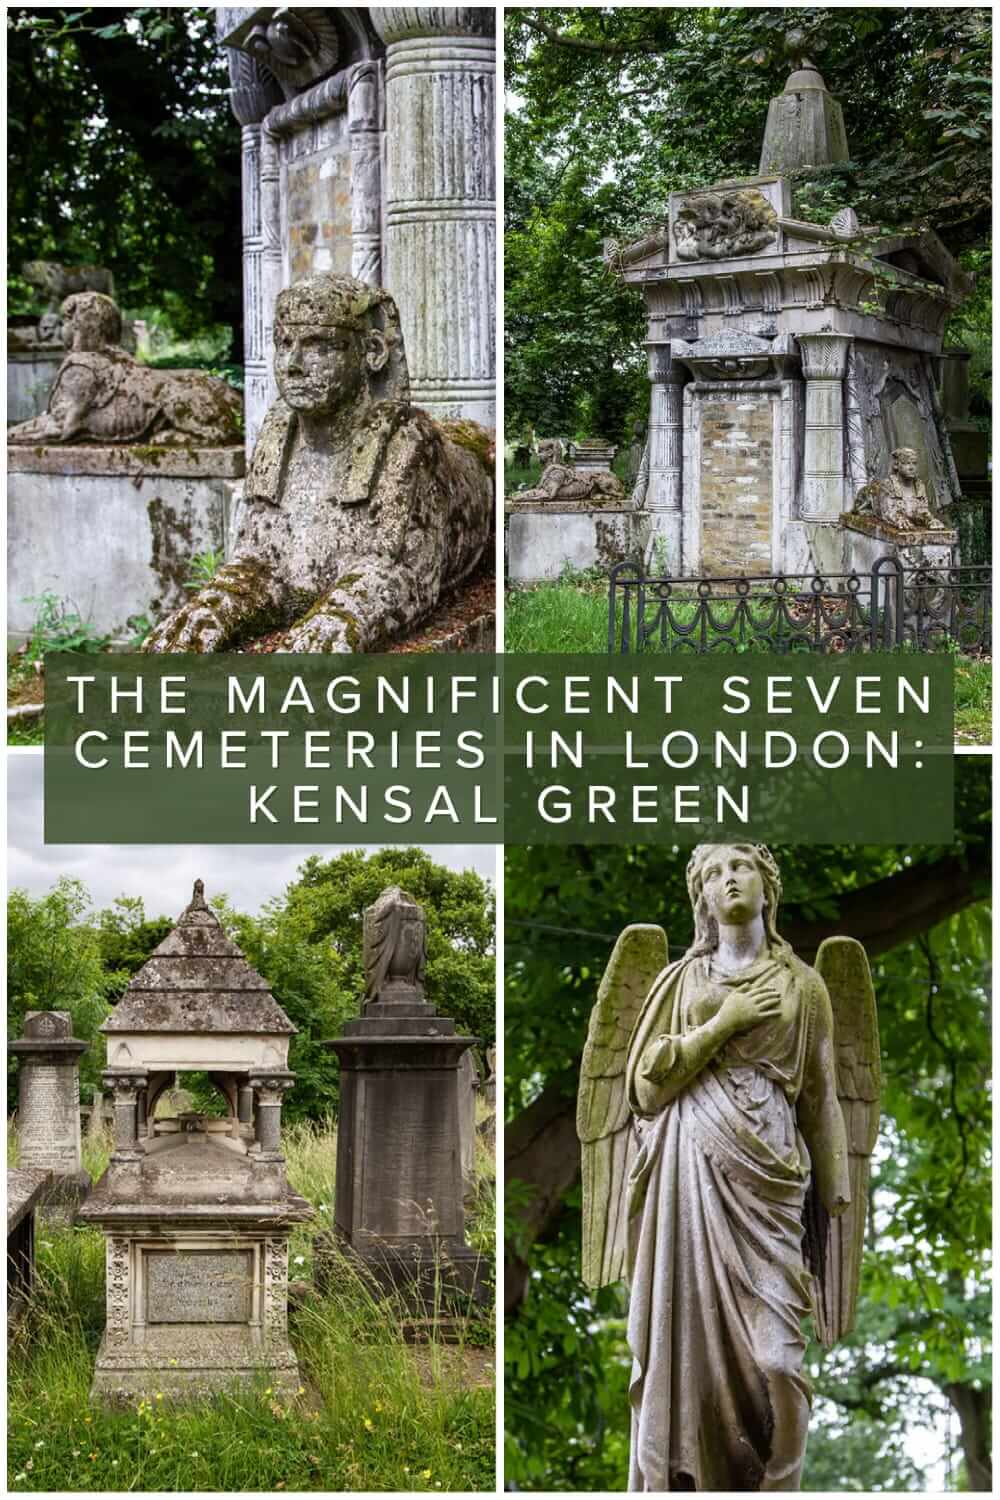 Visiting Kensal Green Cemetery in London, one of the Magnificent Cemeteries #England #UK #tombstone #graveyard